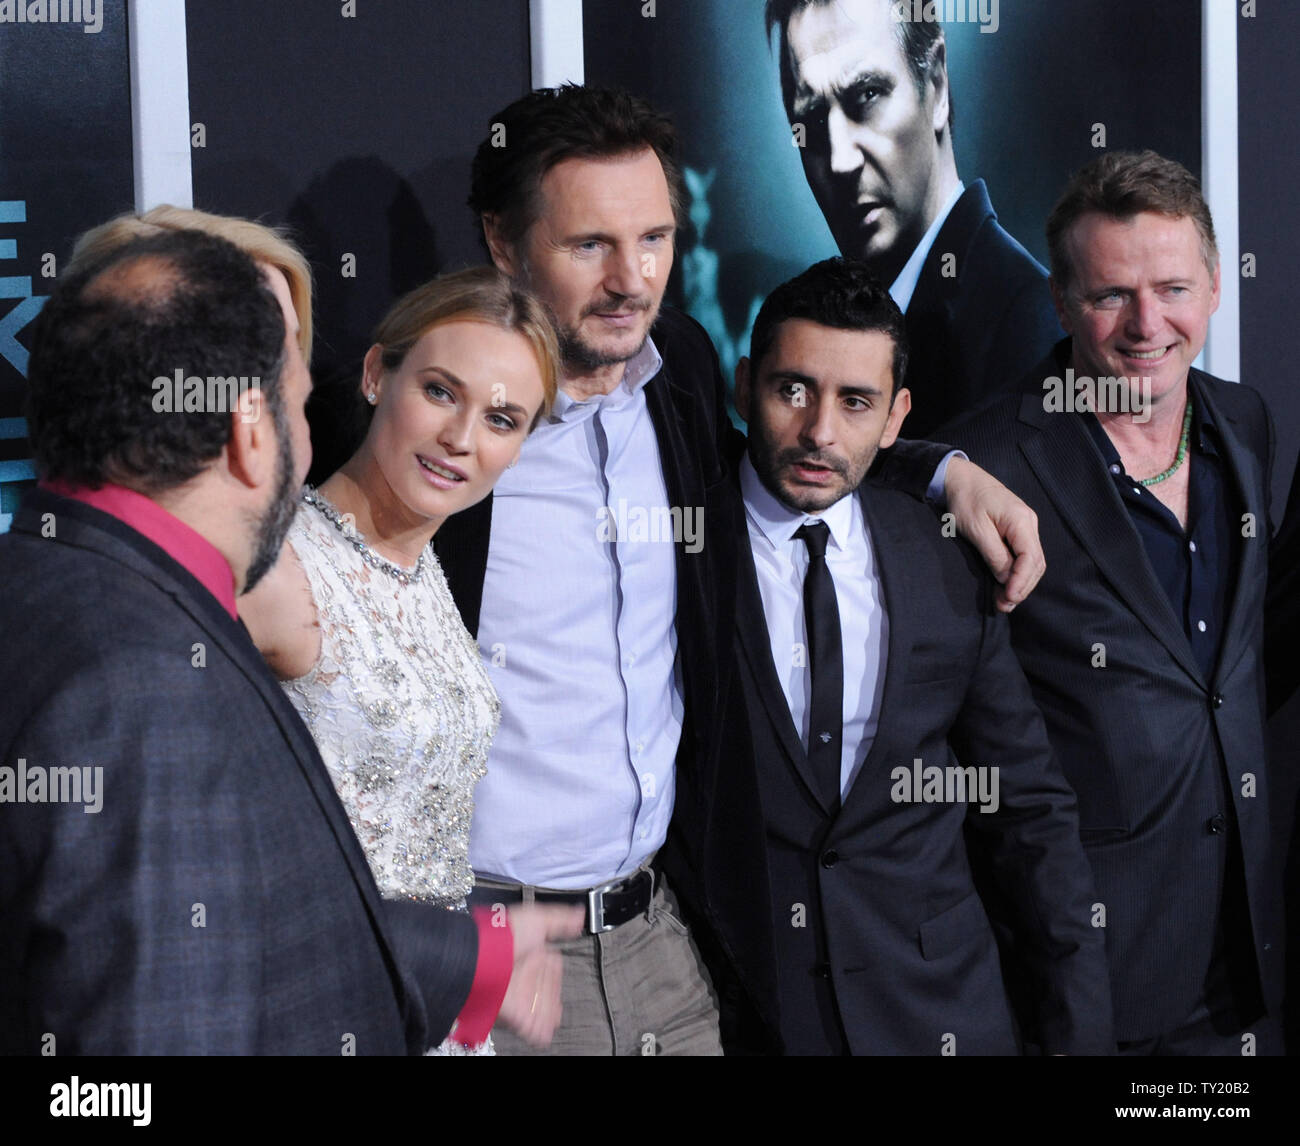 Jaume Collet-Serra (4th-L) , who directed the motion picture thriller 'Unknown', poses with cast members Diane Kruger, Liam Neeson, (Collet-Serra) and Aidan Quinn (L-R) on the red carpet during the premiere of the film at The Mann Village Theatre in Los Angeles on February 16, 2011.  UPI/Jim Ruymen Stock Photo